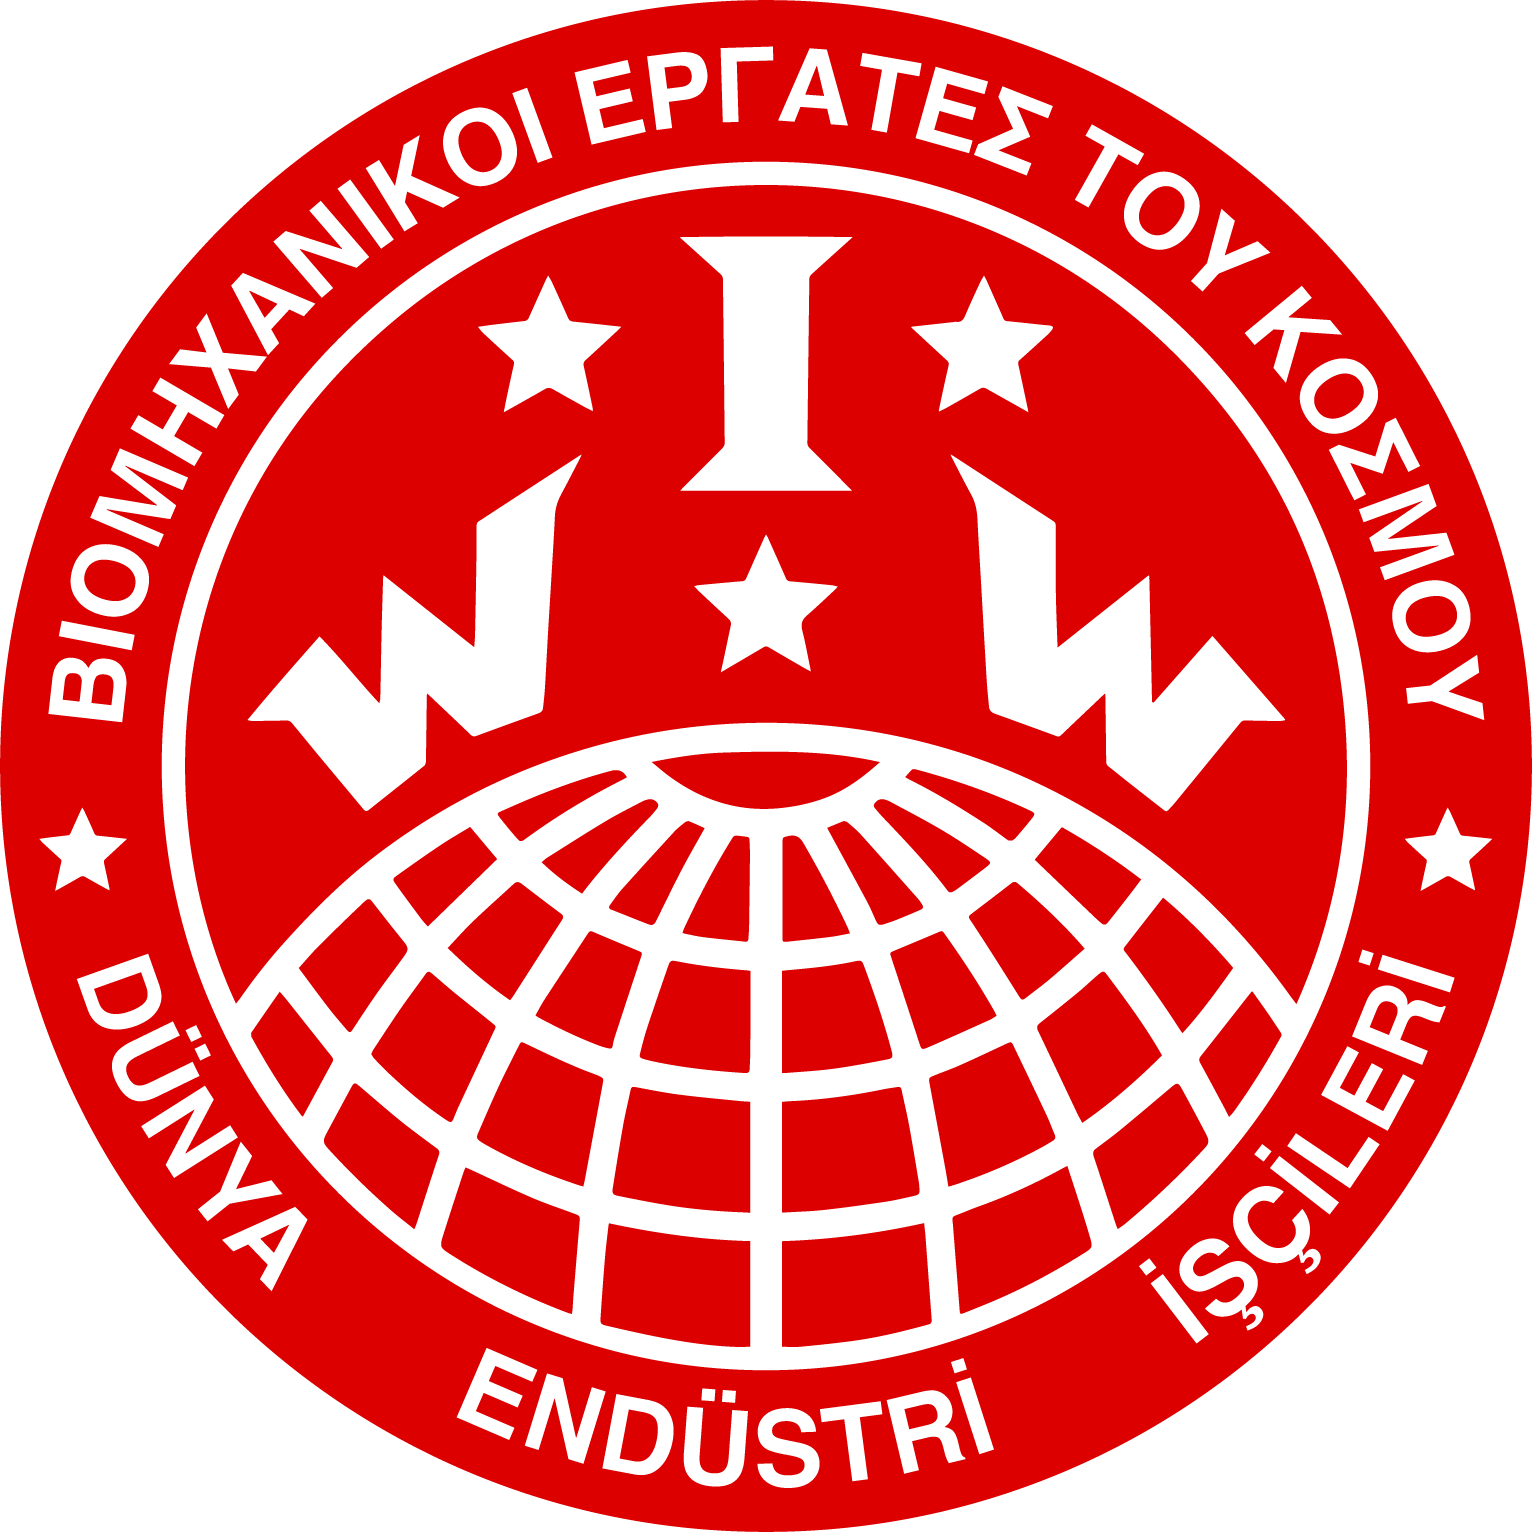 Industrial Workers of the World (IWW) Cyprus